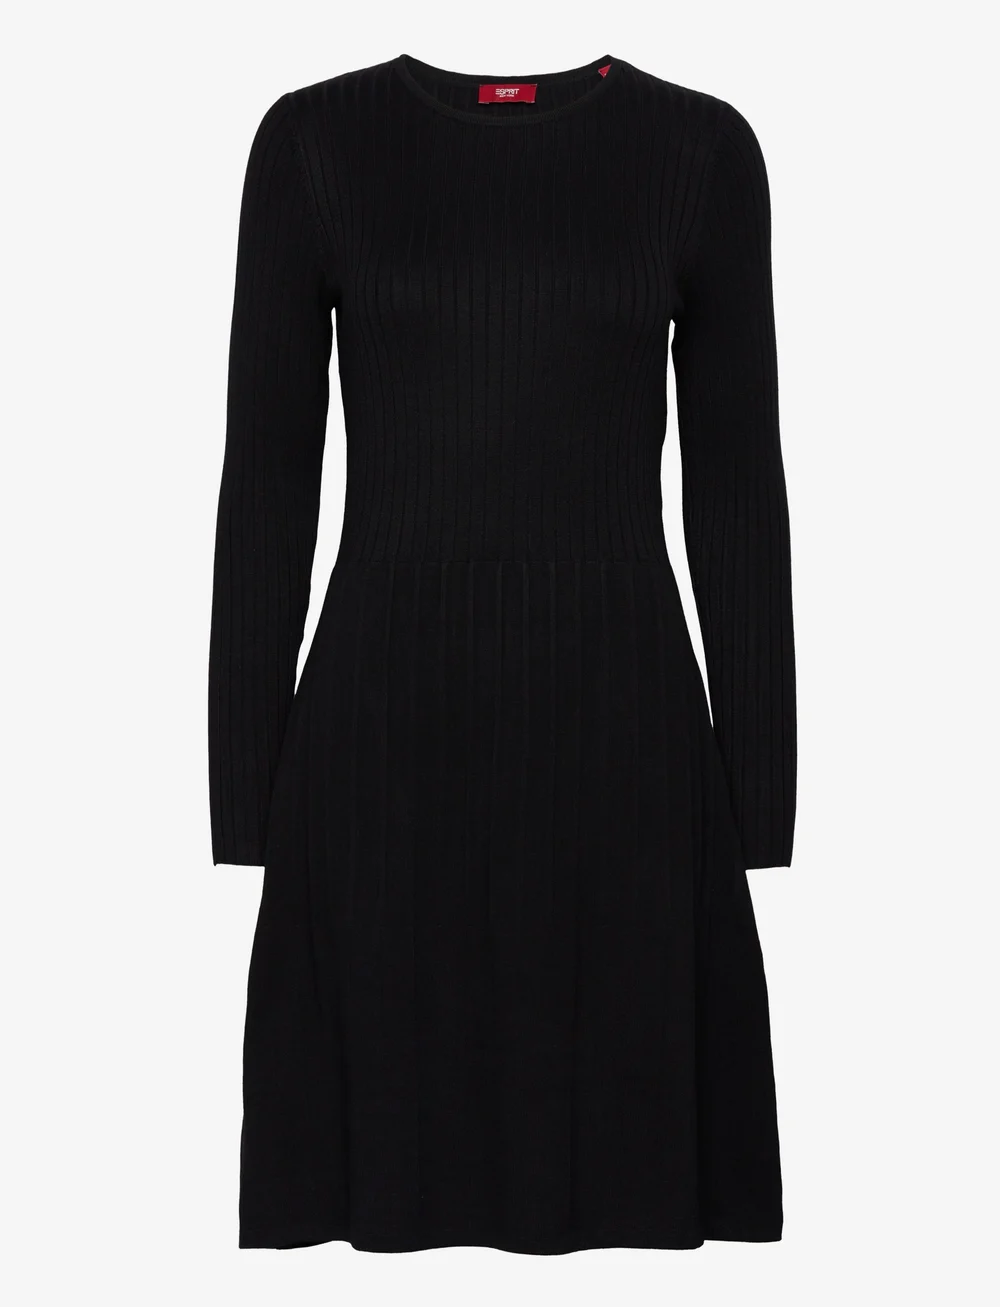 Esprit Casual Women Dresses Flat Knitted Kneelength - Knitted dresses 